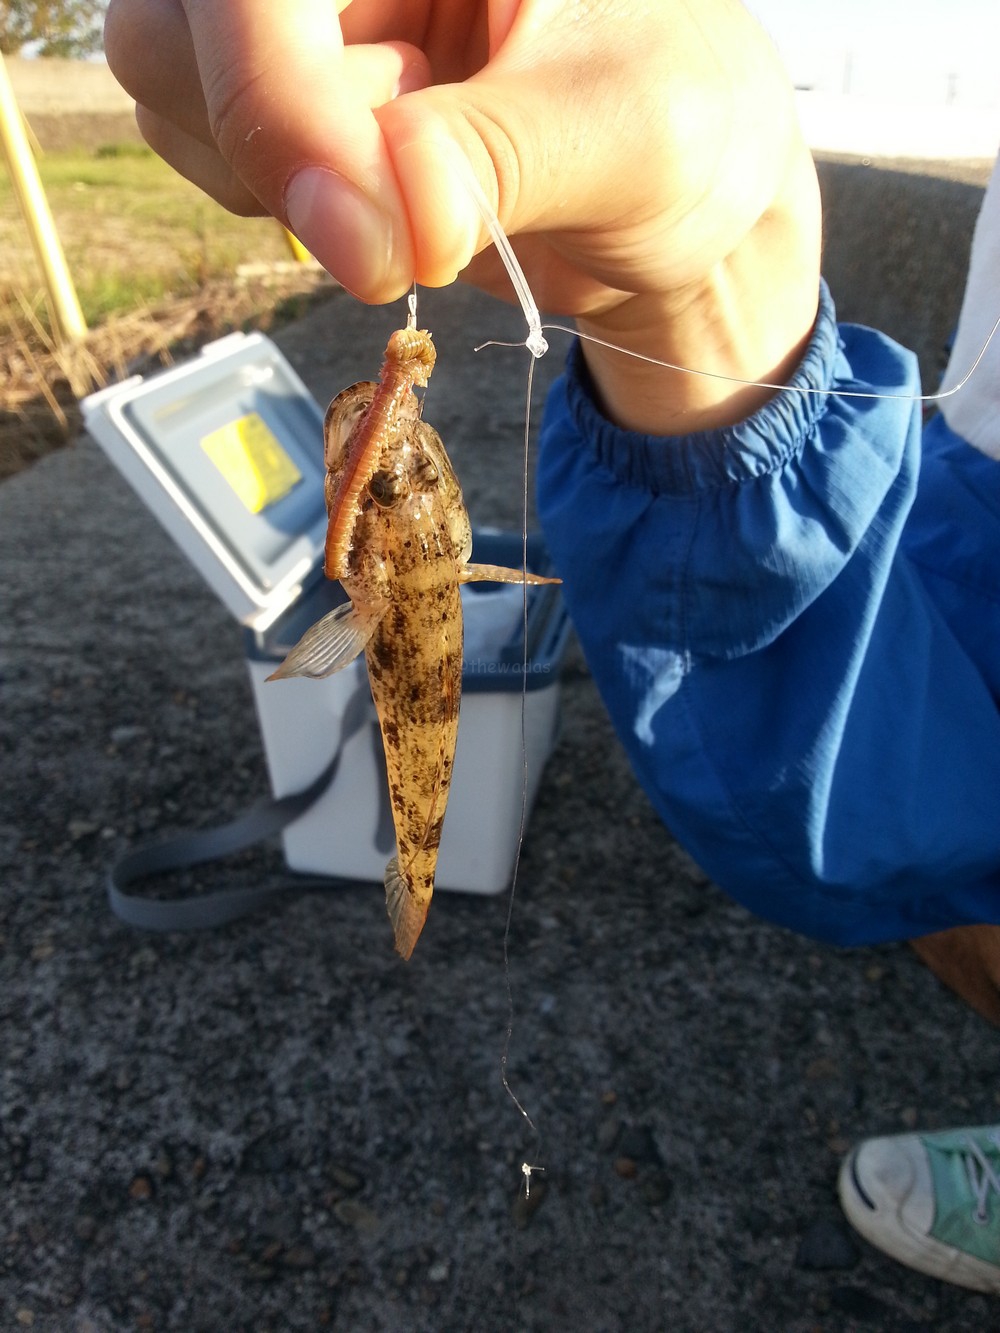 First catch (goby fish)!